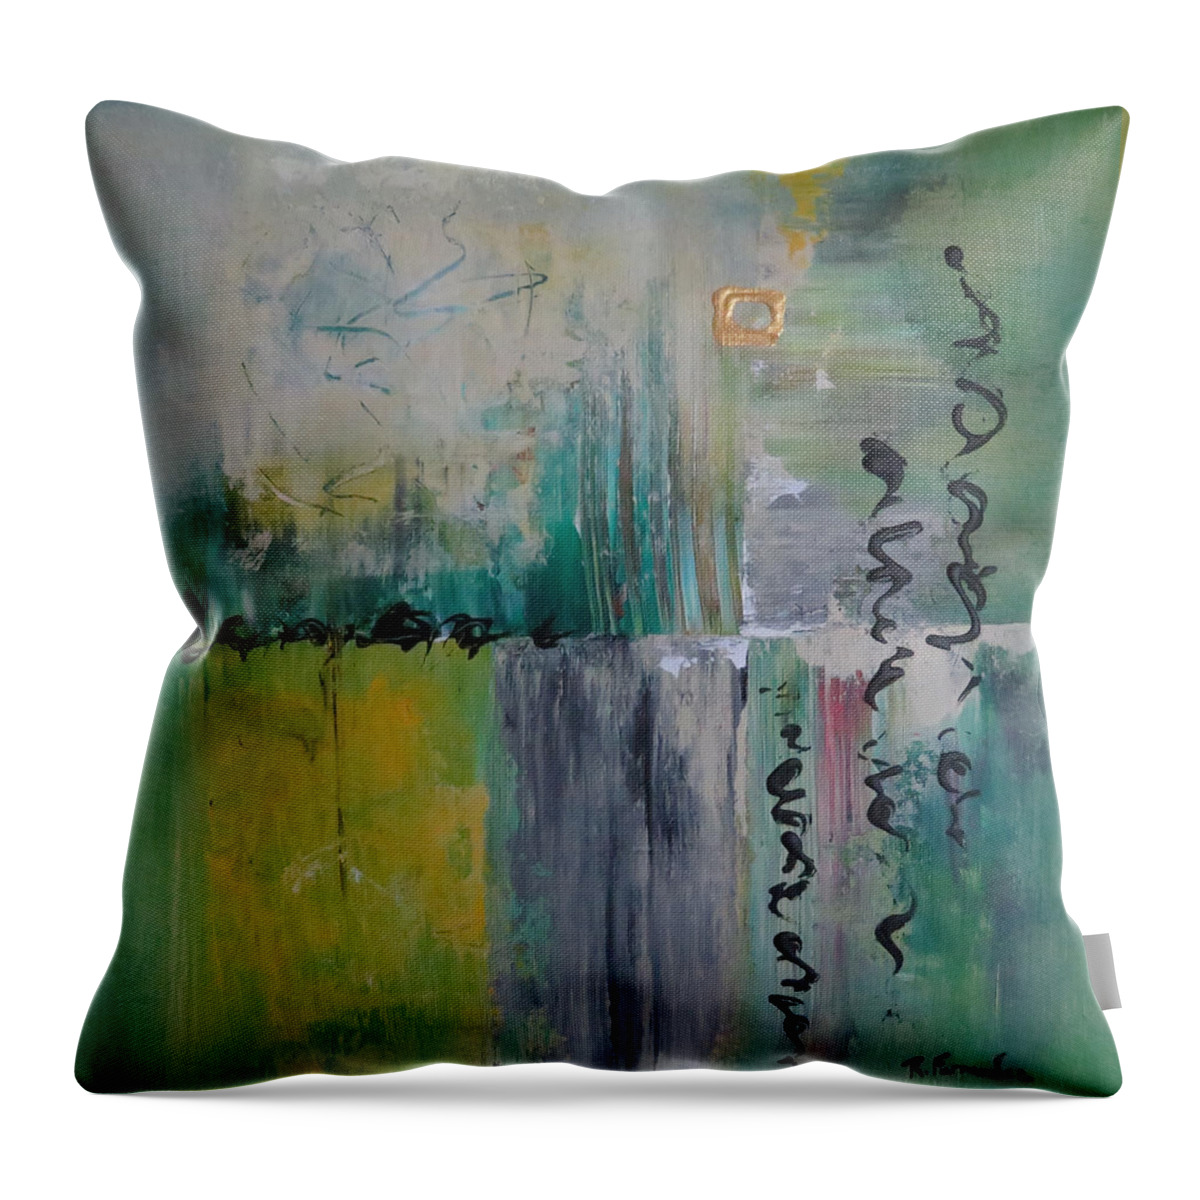 Abstract Throw Pillow featuring the painting A Message From The Other World by Raymond Fernandez